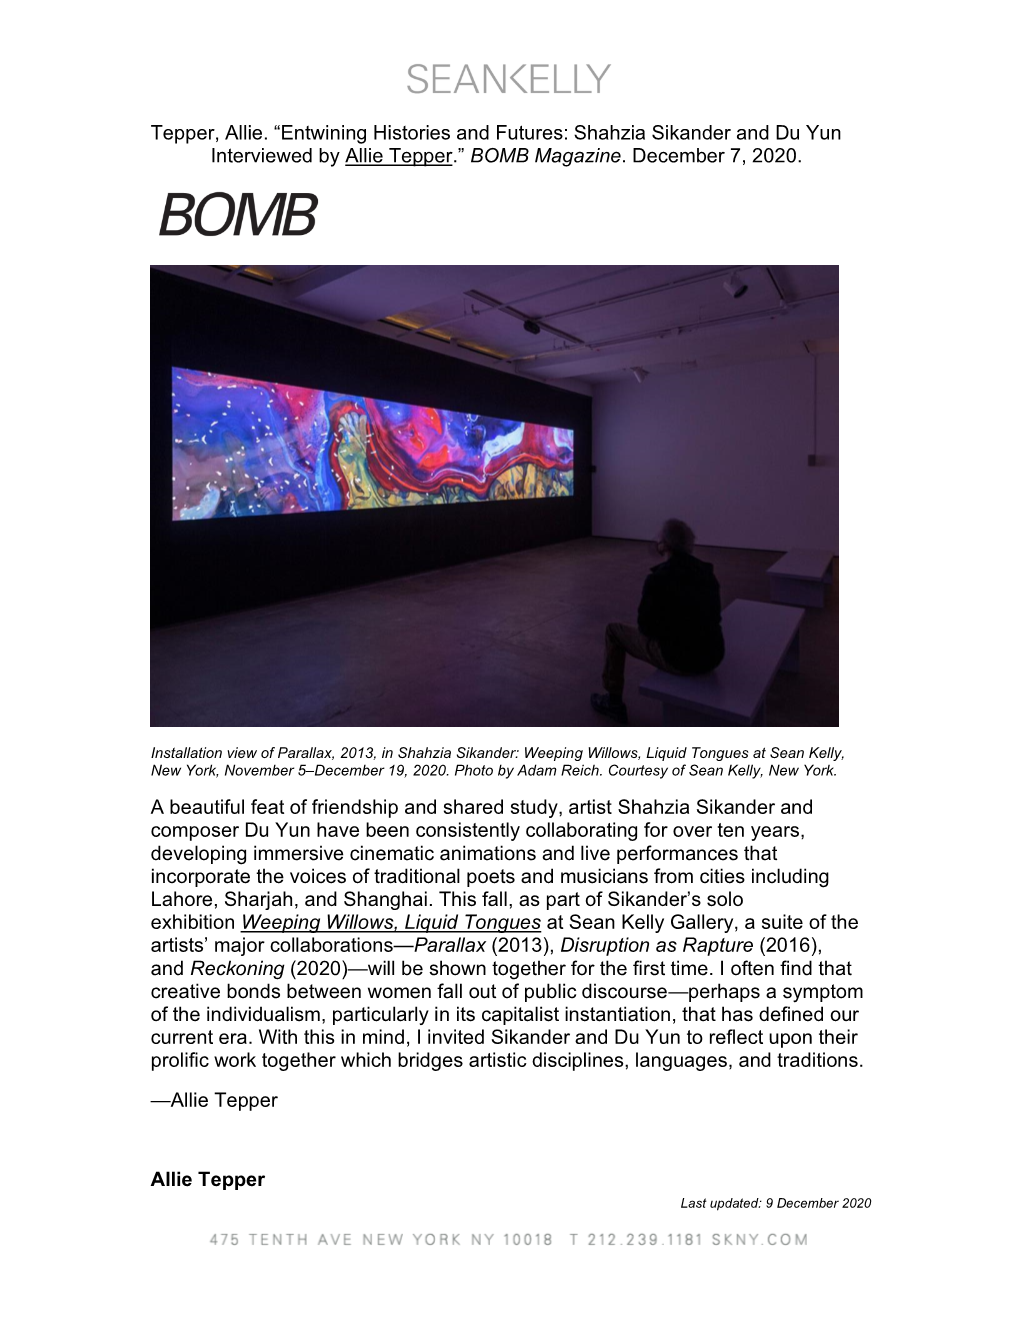 Entwining Histories and Futures: Shahzia Sikander and Du Yun Interviewed by Allie Tepper.” BOMB Magazine